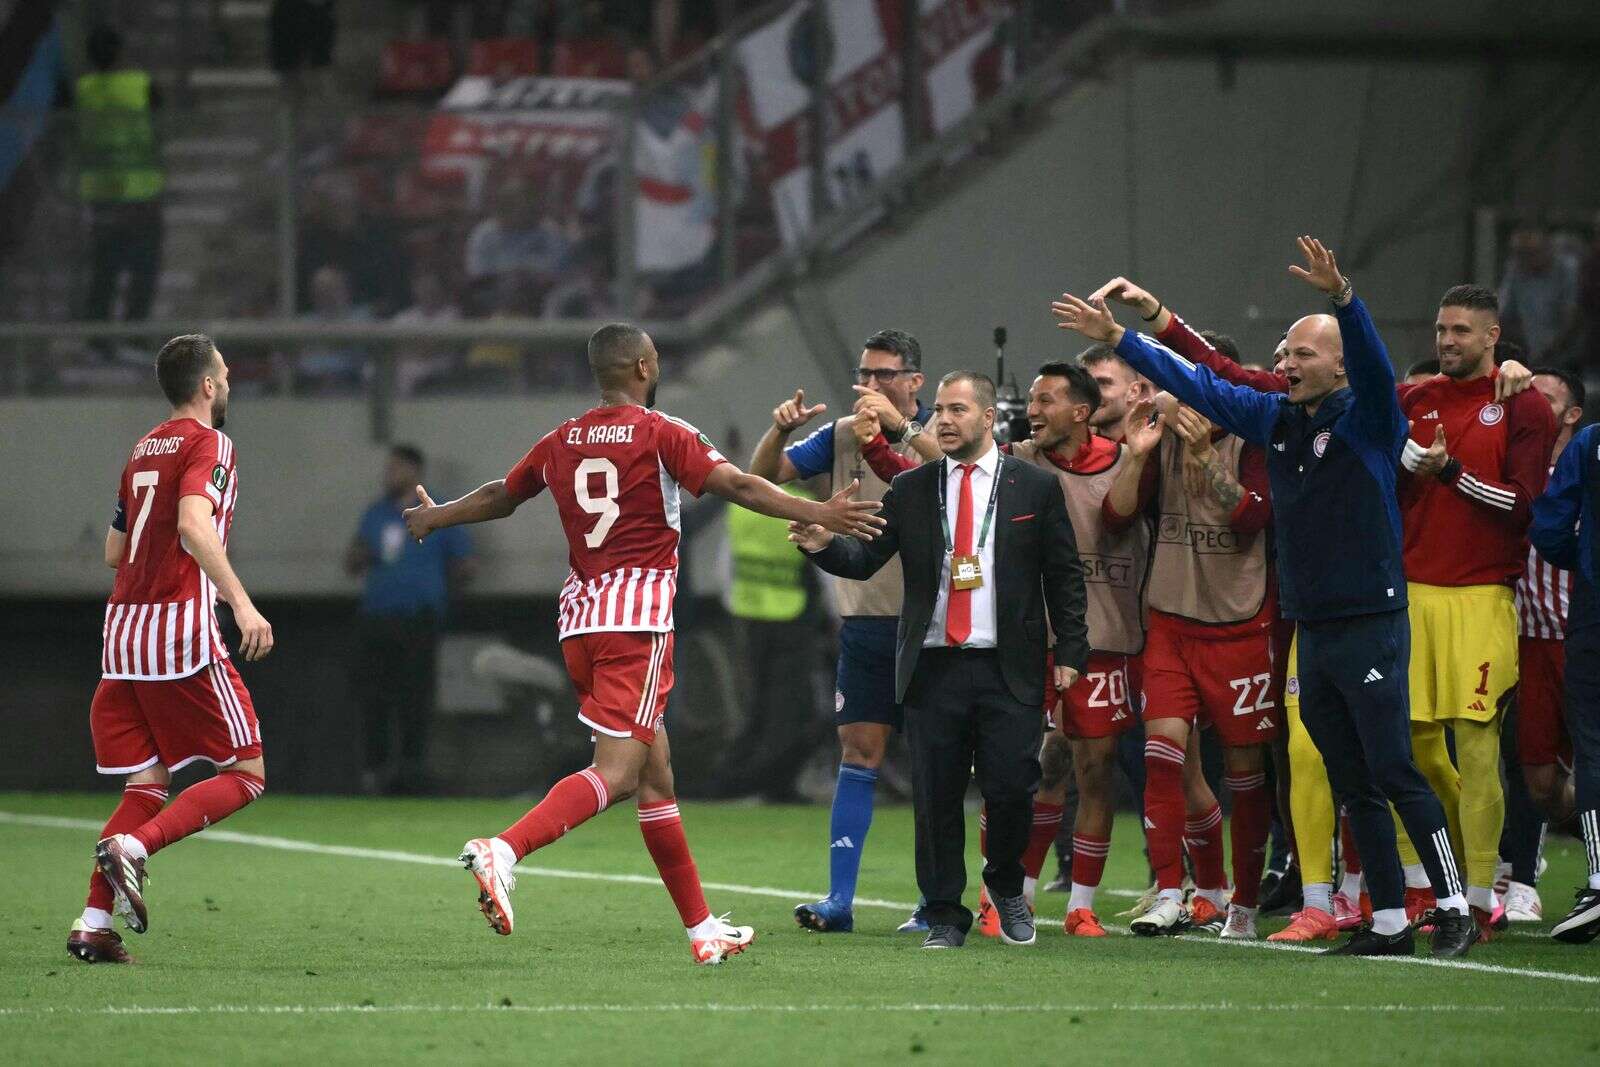 europa conference league: 'great experience' as olympiakos make history by reaching maiden final